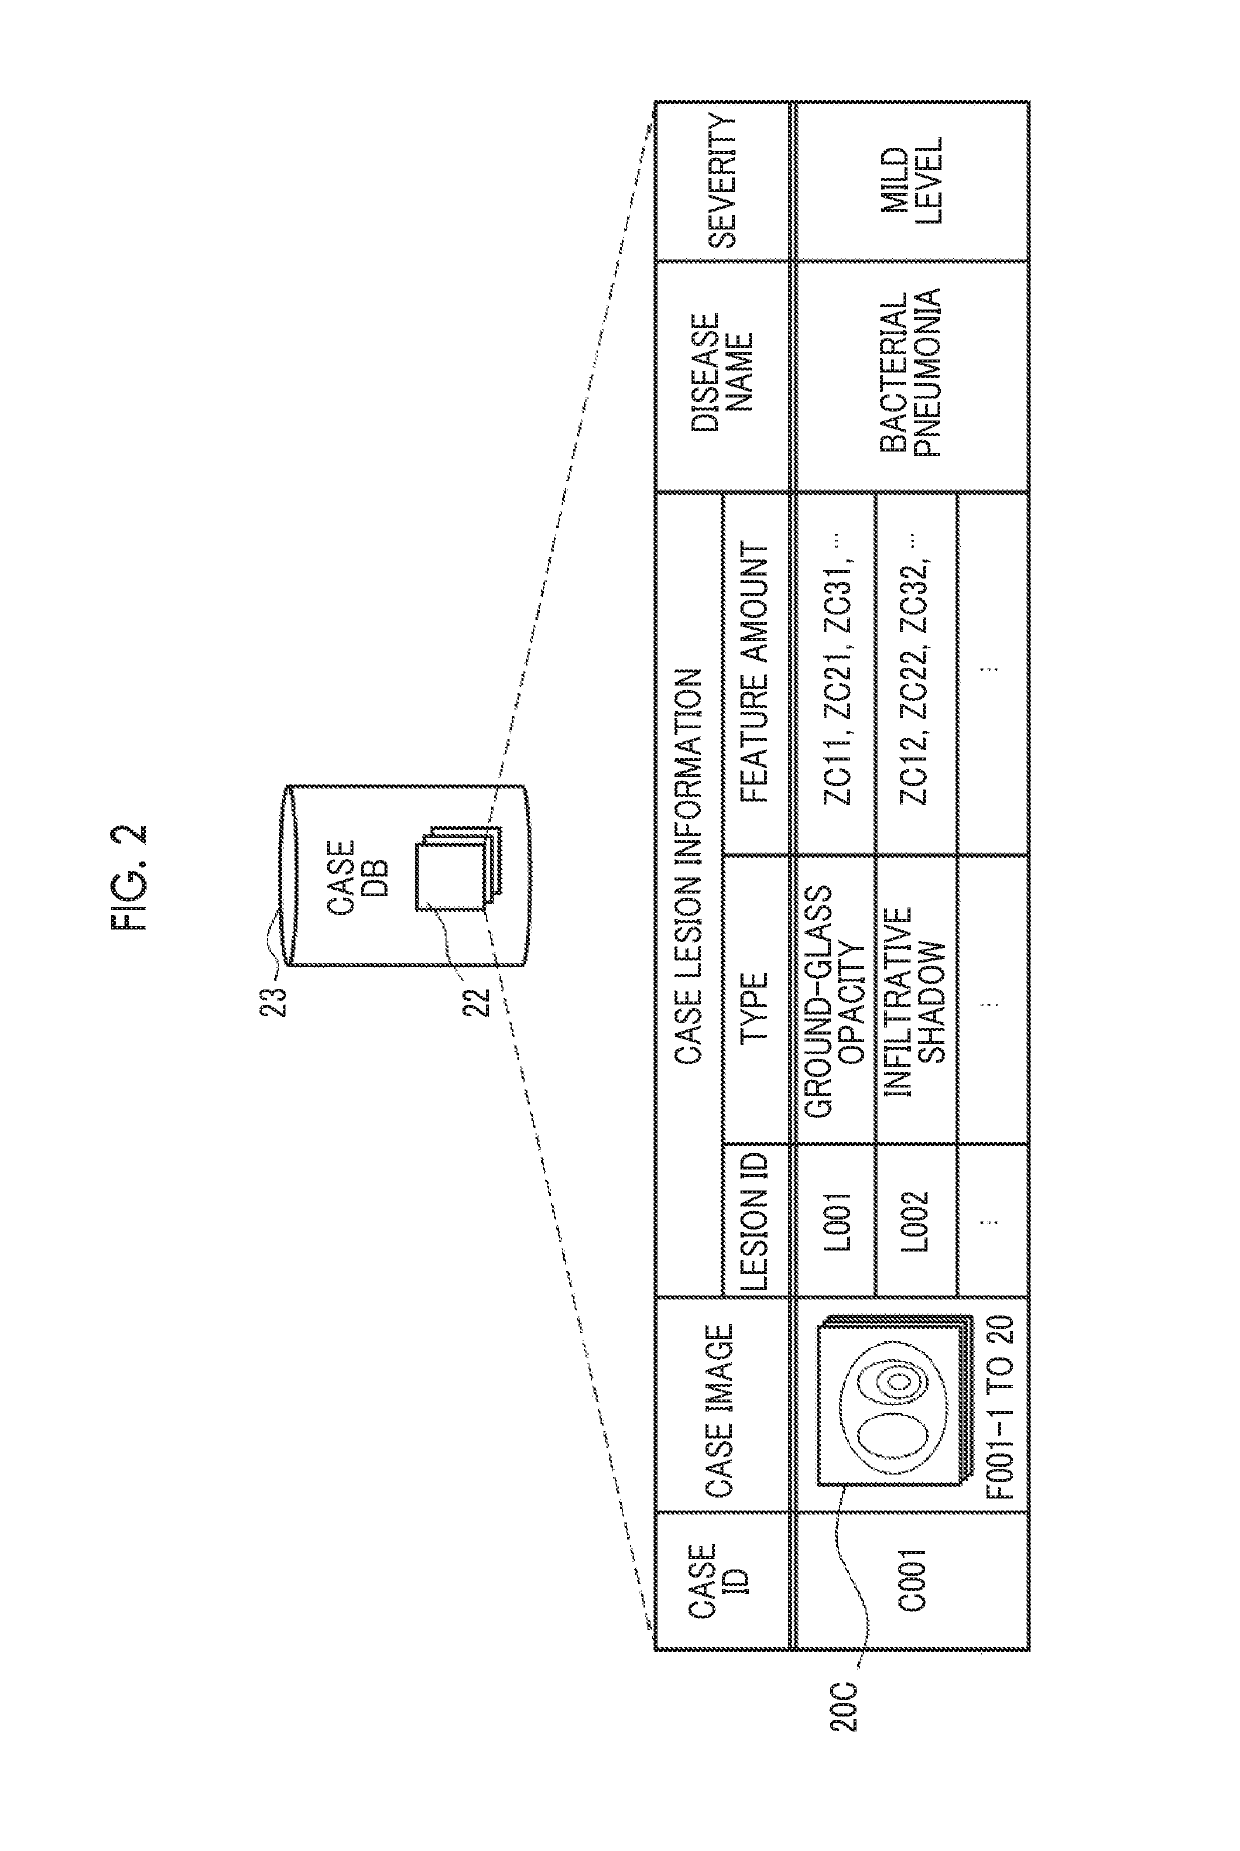 Similar case search apparatus, method for operating similar case search apparatus, and similar case search system